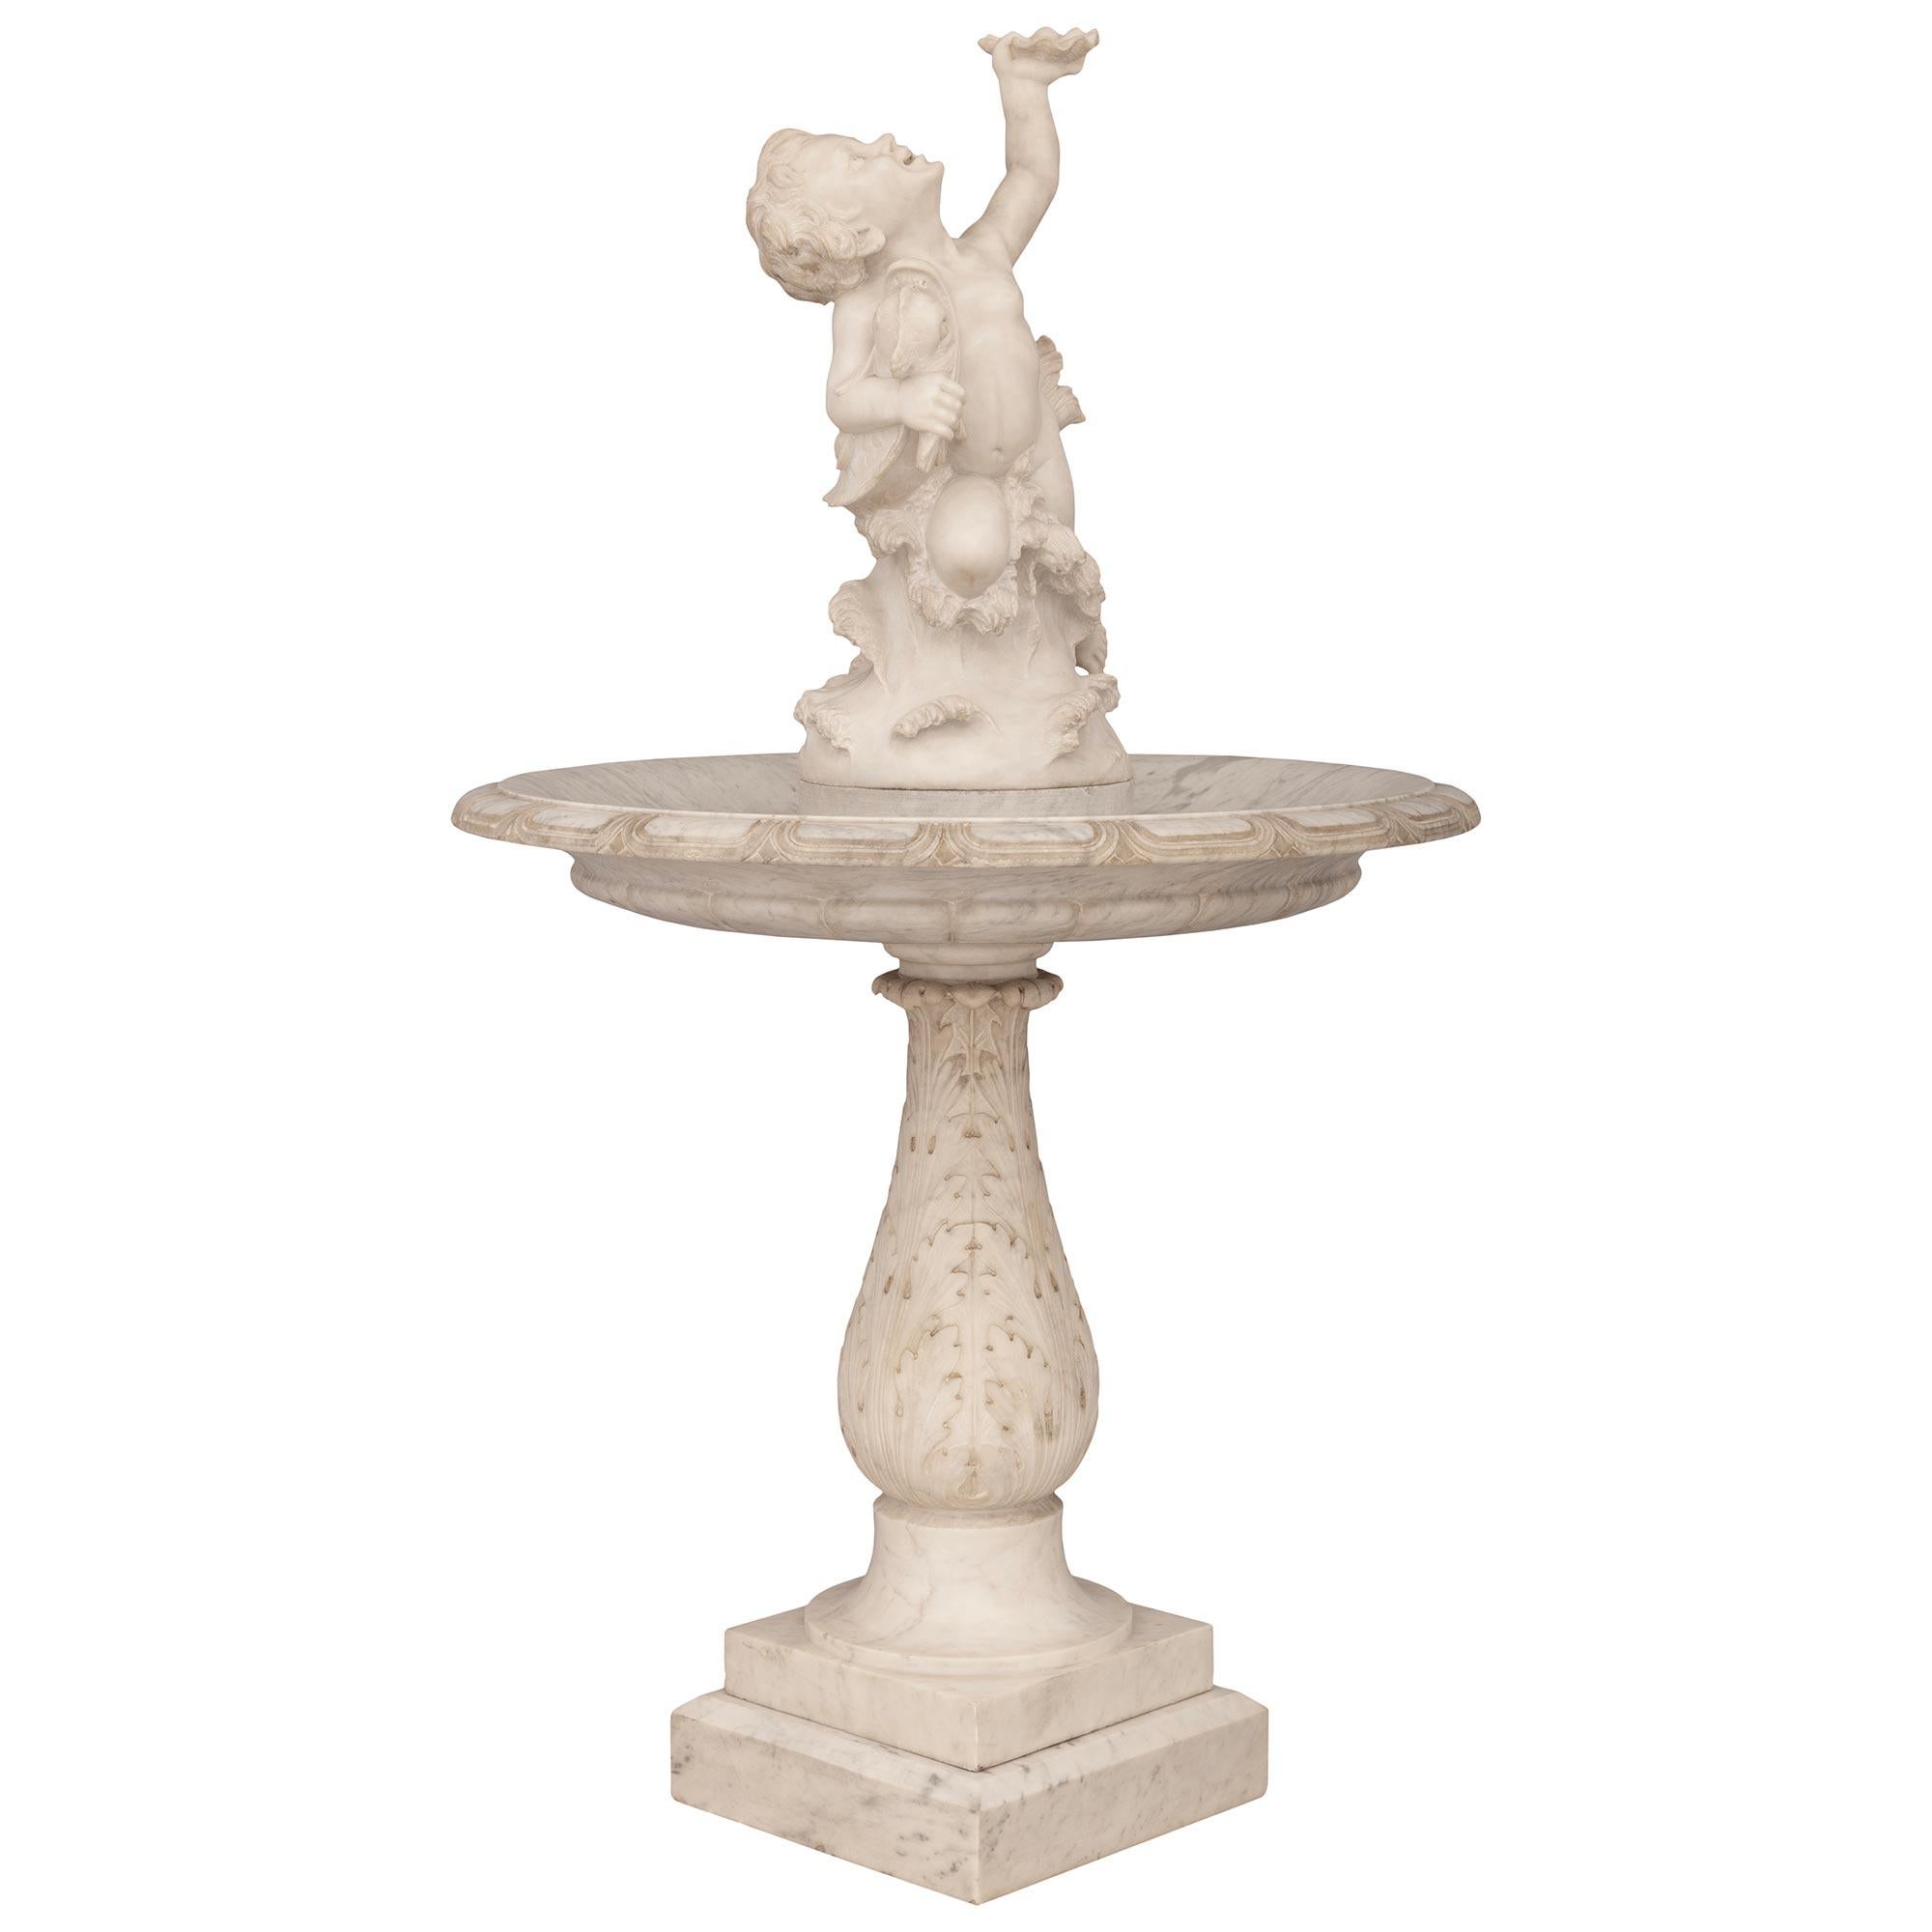 Italian 19th Century White Carrara Marble Fountain Of Cupid With A Dolphin In Good Condition For Sale In West Palm Beach, FL